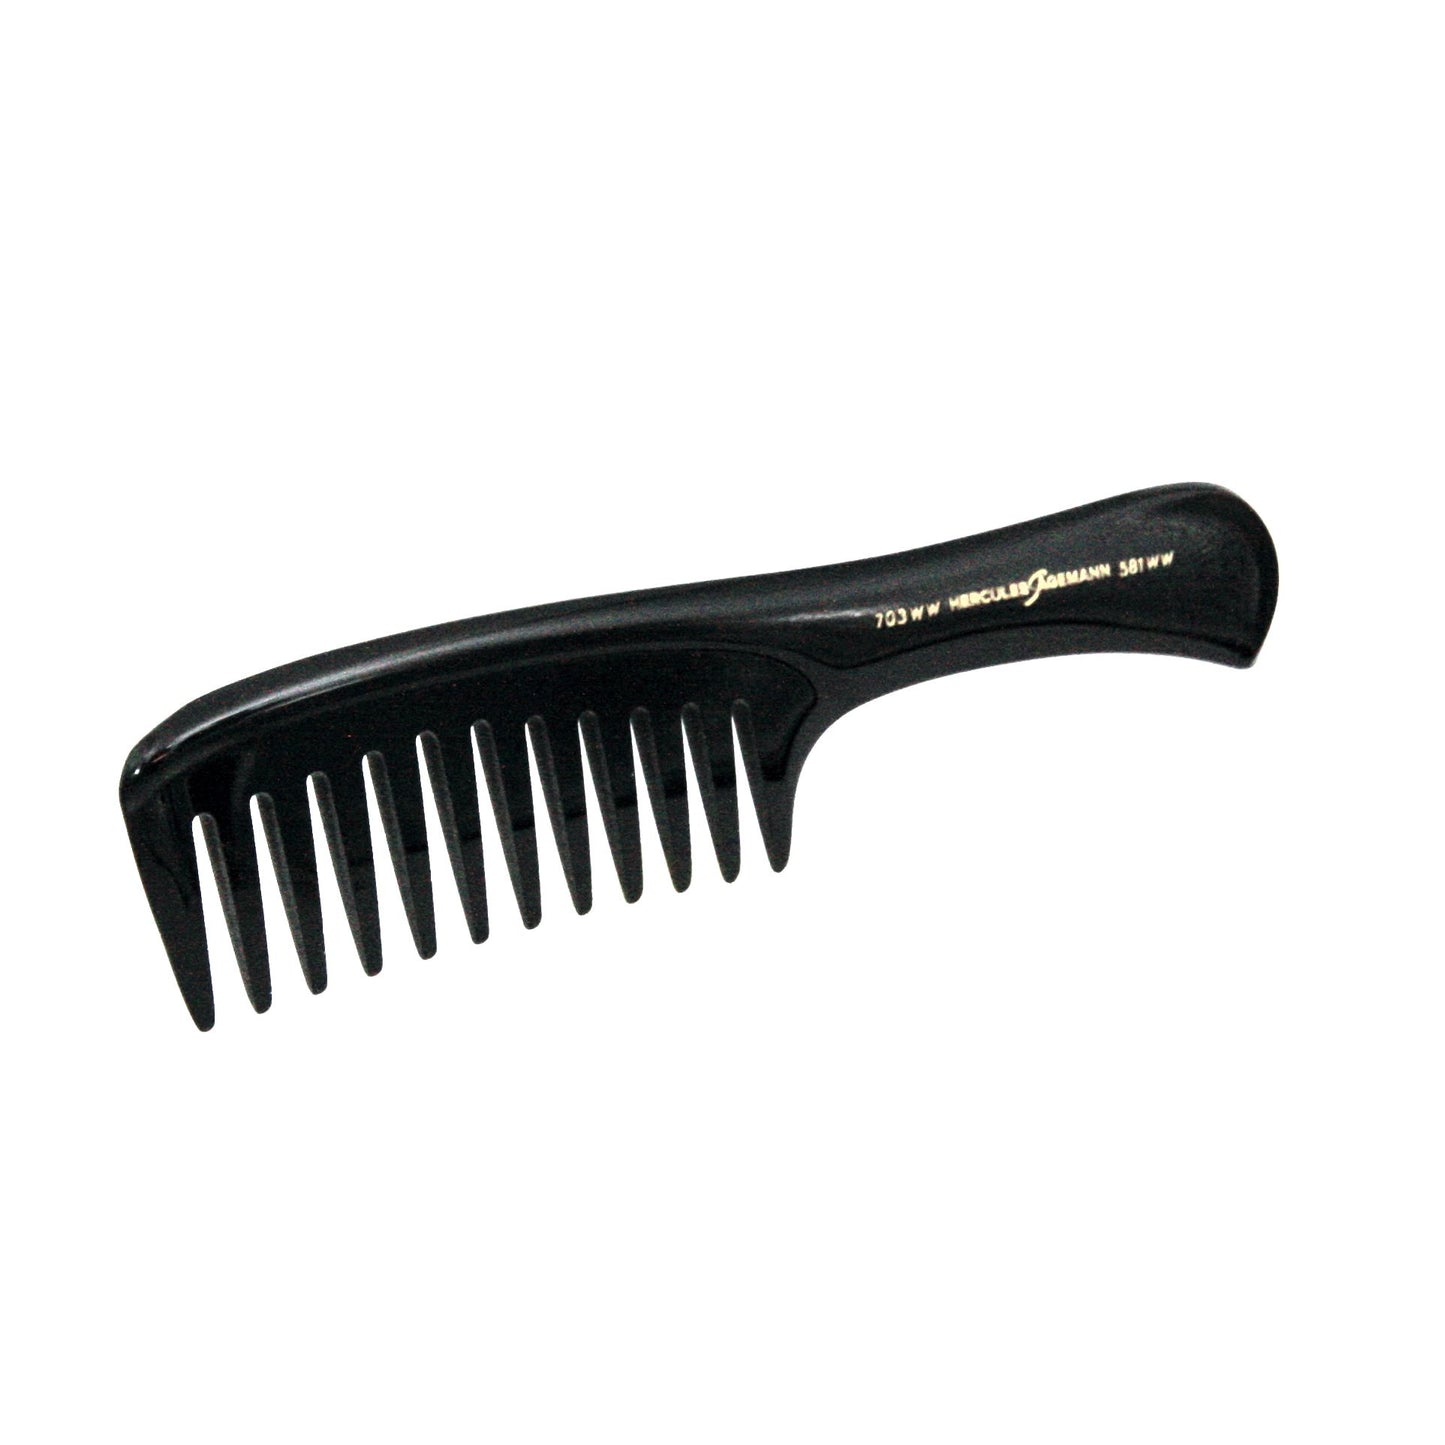 7in Extra Course Tooth Handle Comb, Hercules Sagemann 703WW